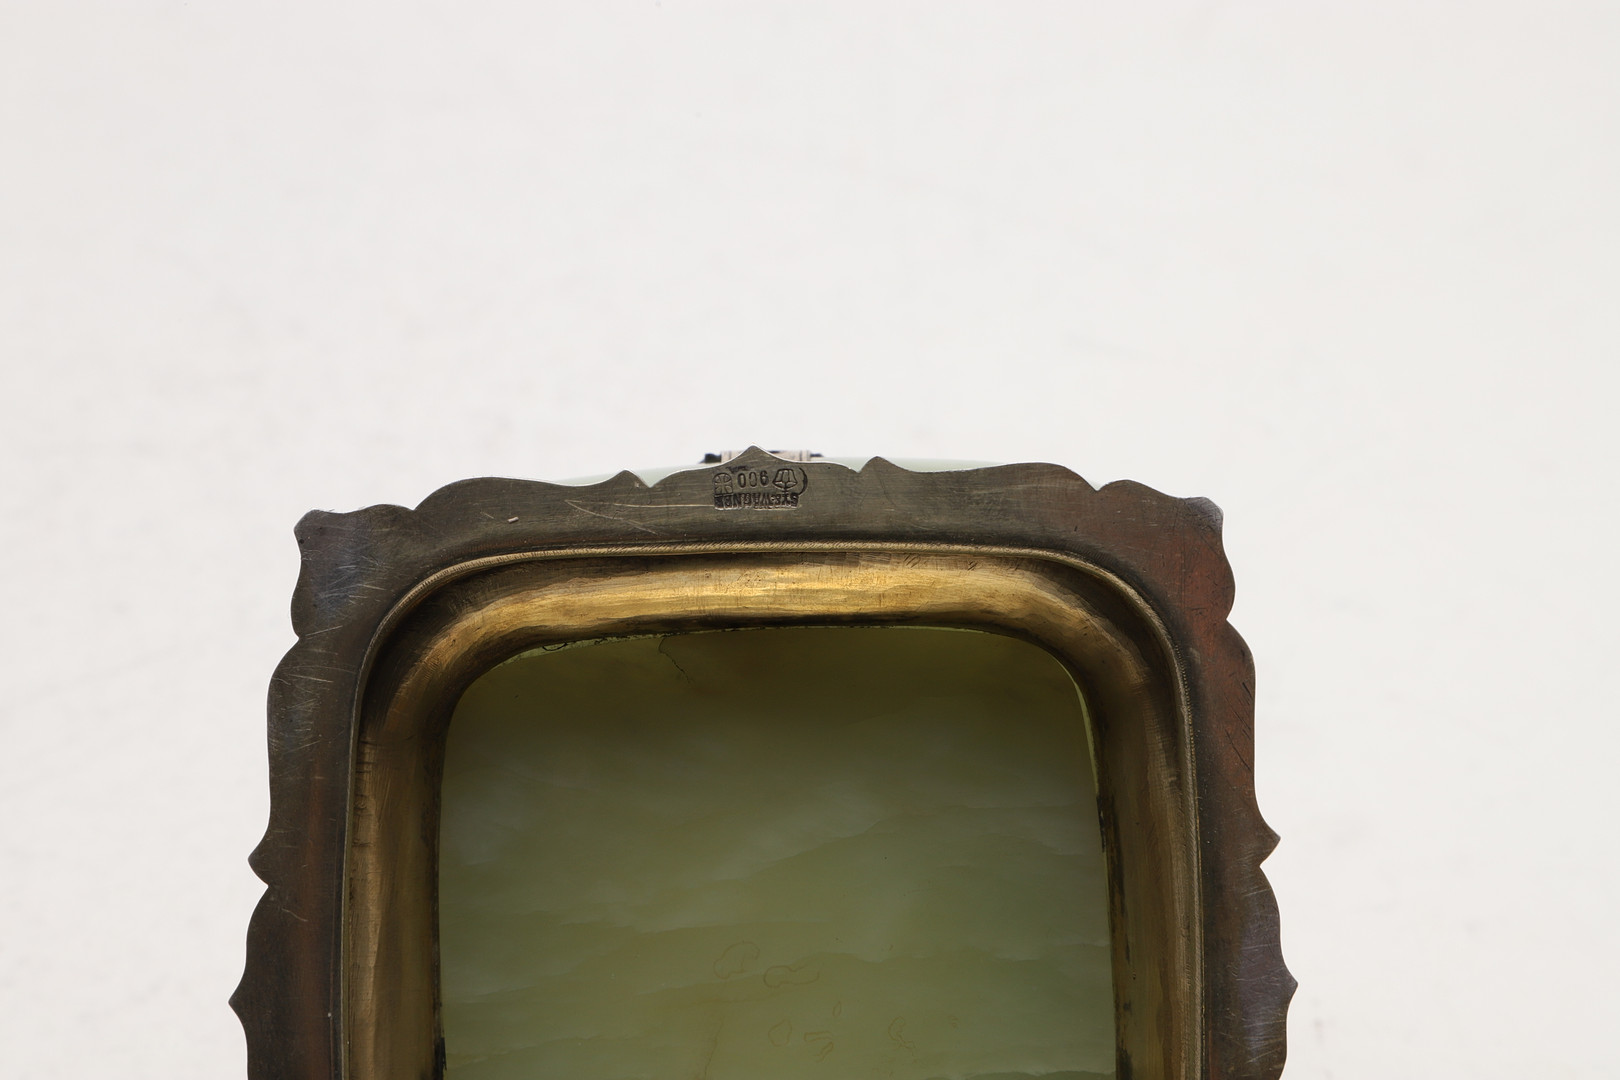 A LATE 19TH/ EARLY 20TH CENTURY GERMAN ONYX MOUNTED PARCEL-GILT BOX & COVER. - Image 7 of 7